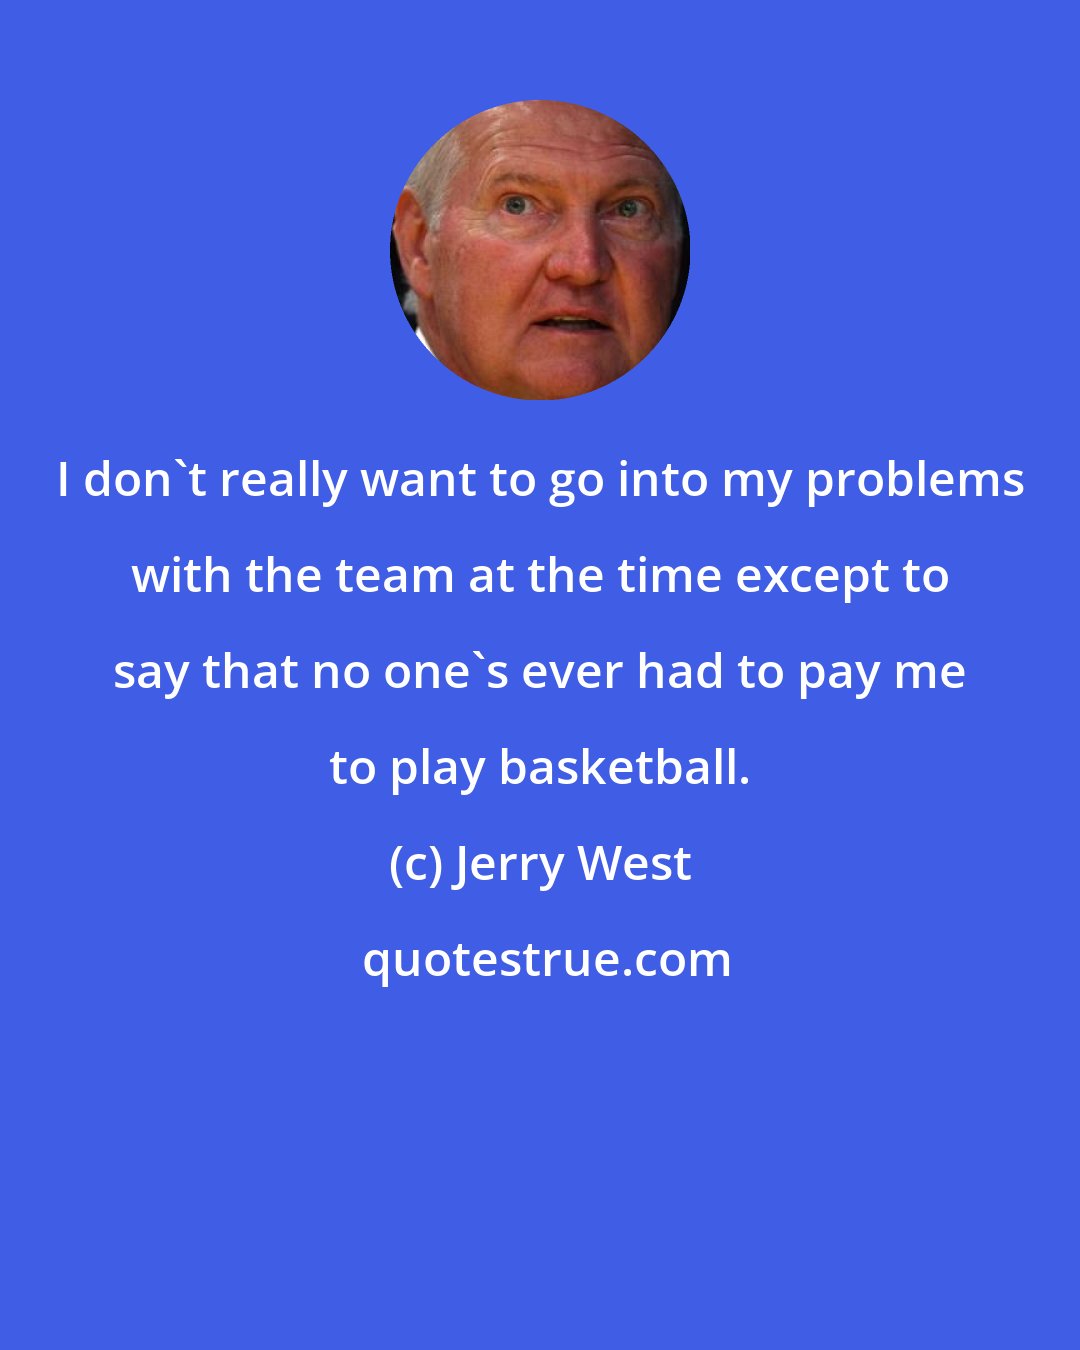 Jerry West: I don't really want to go into my problems with the team at the time except to say that no one's ever had to pay me to play basketball.